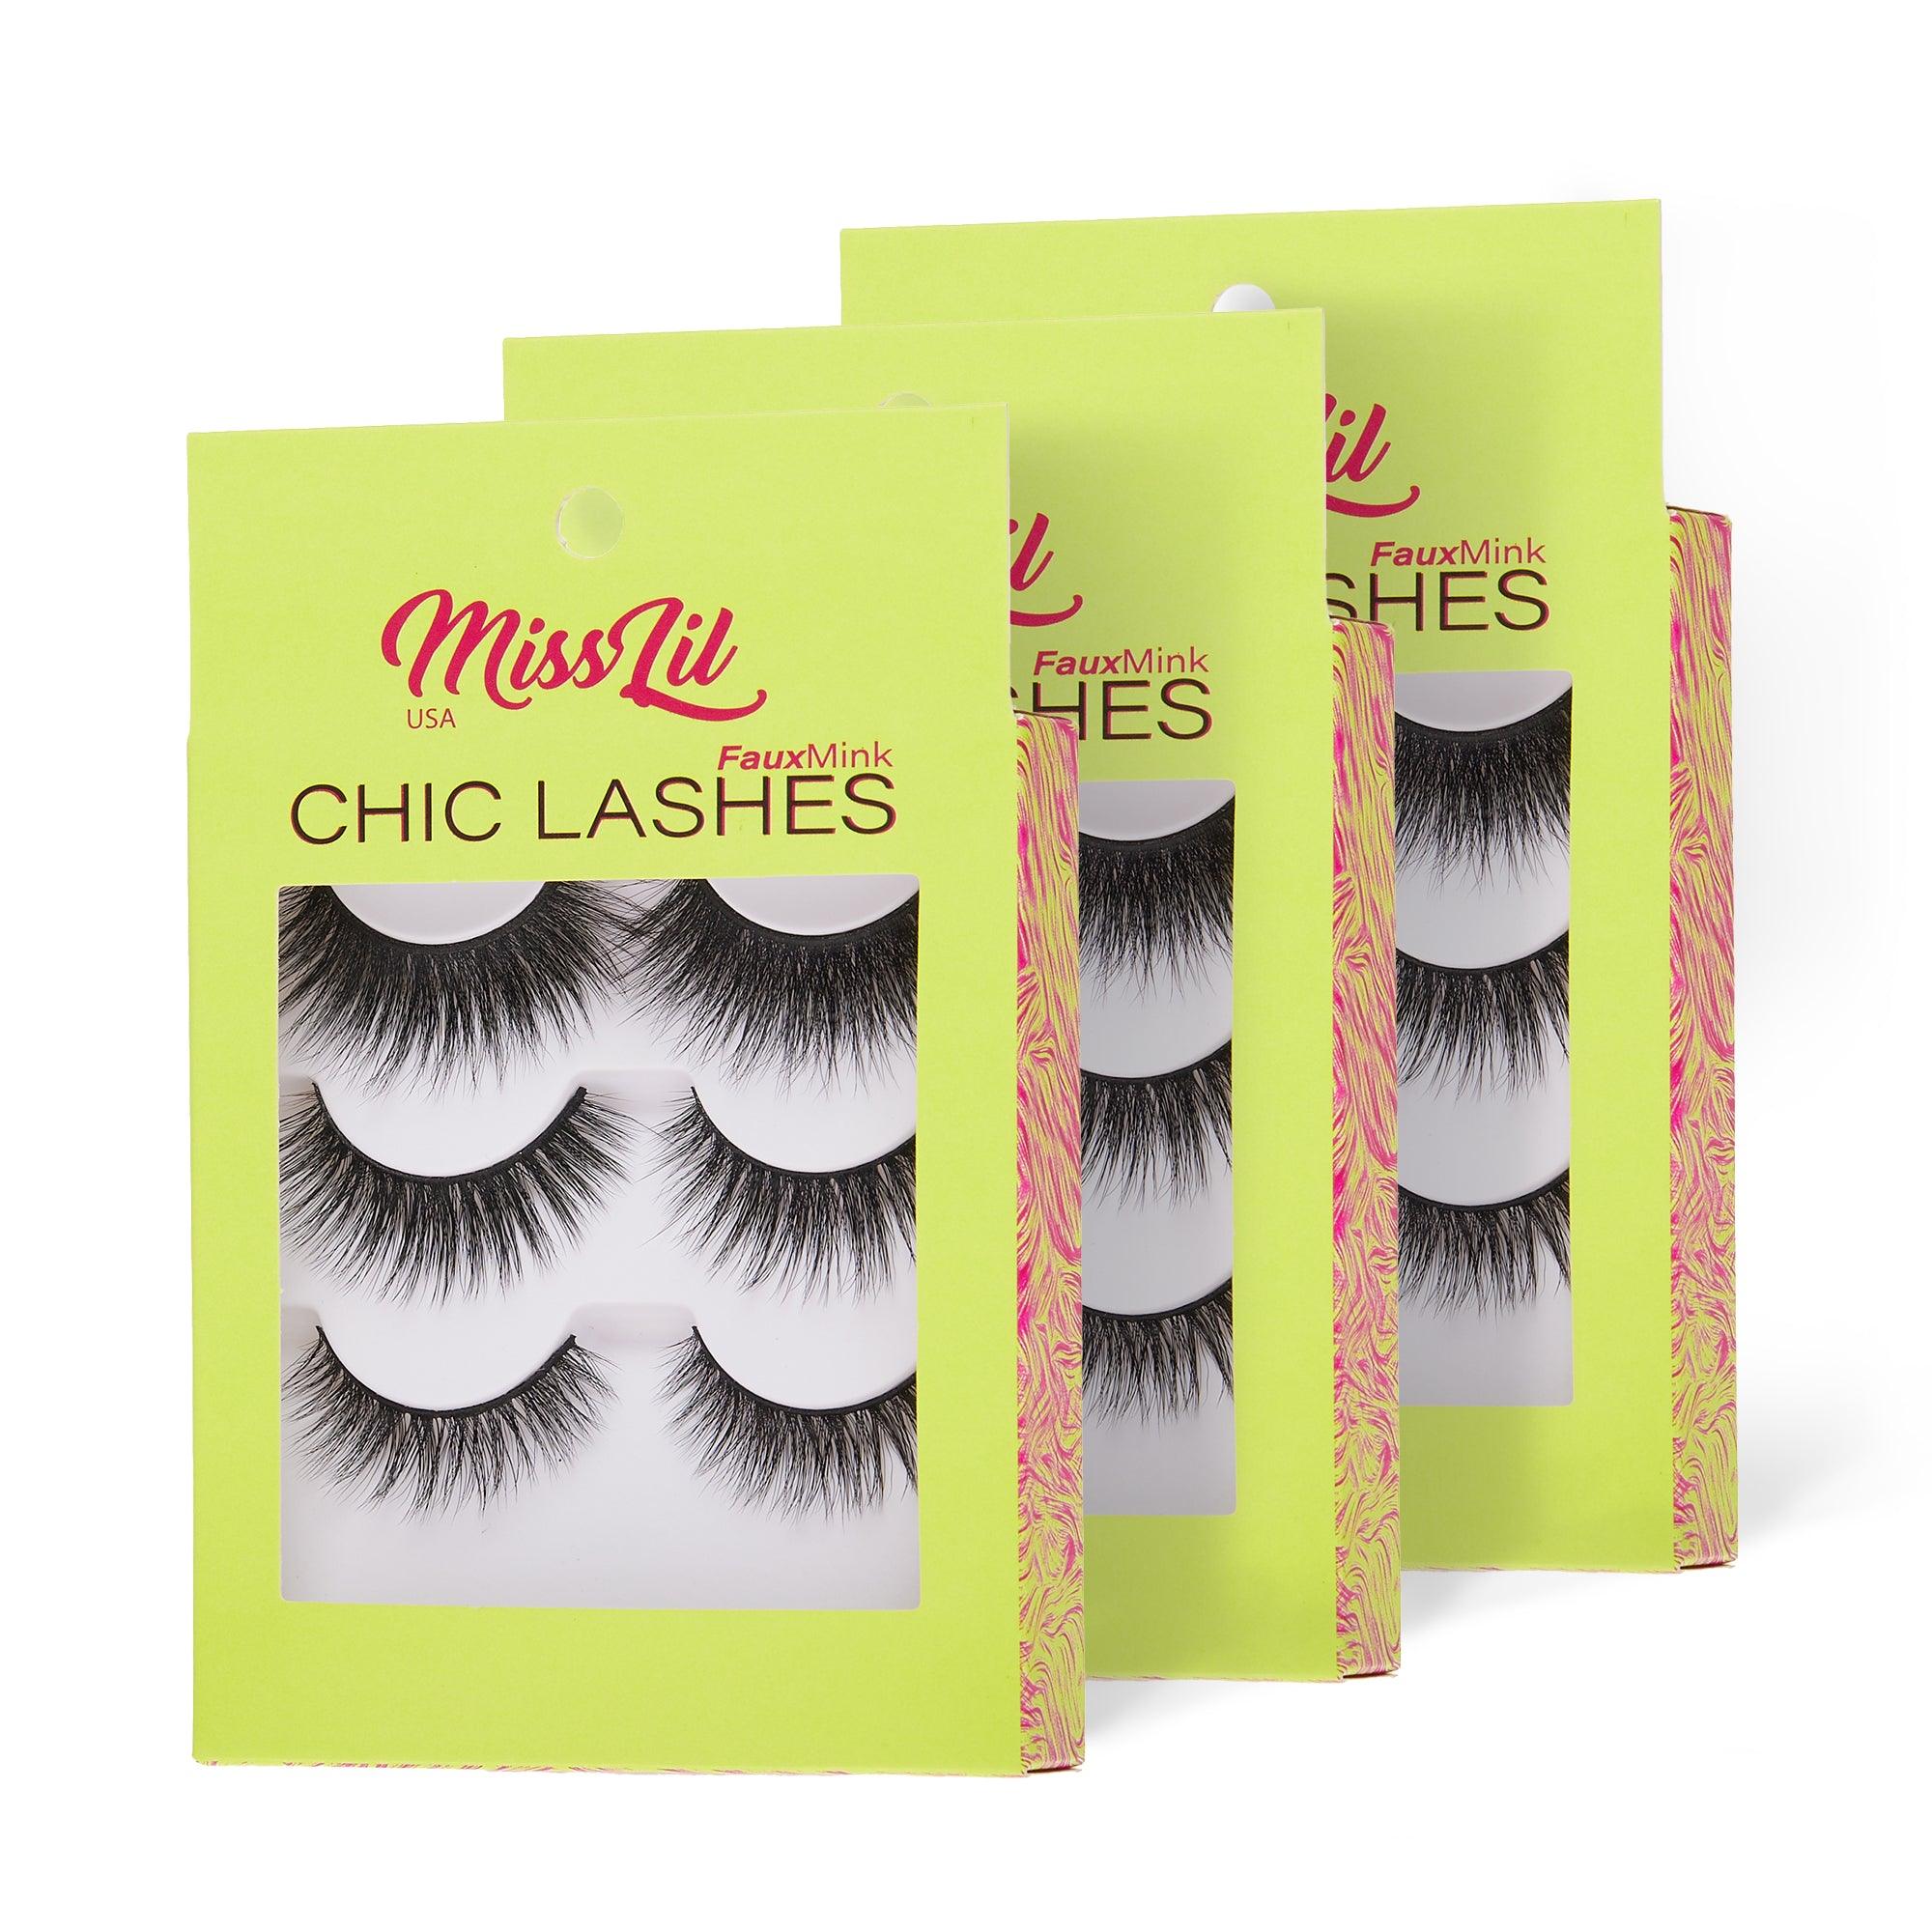 3-Pair Faux Mink Eyelashes - Chic Lashes Collection #39 - Pack of 3 - Miss Lil USA